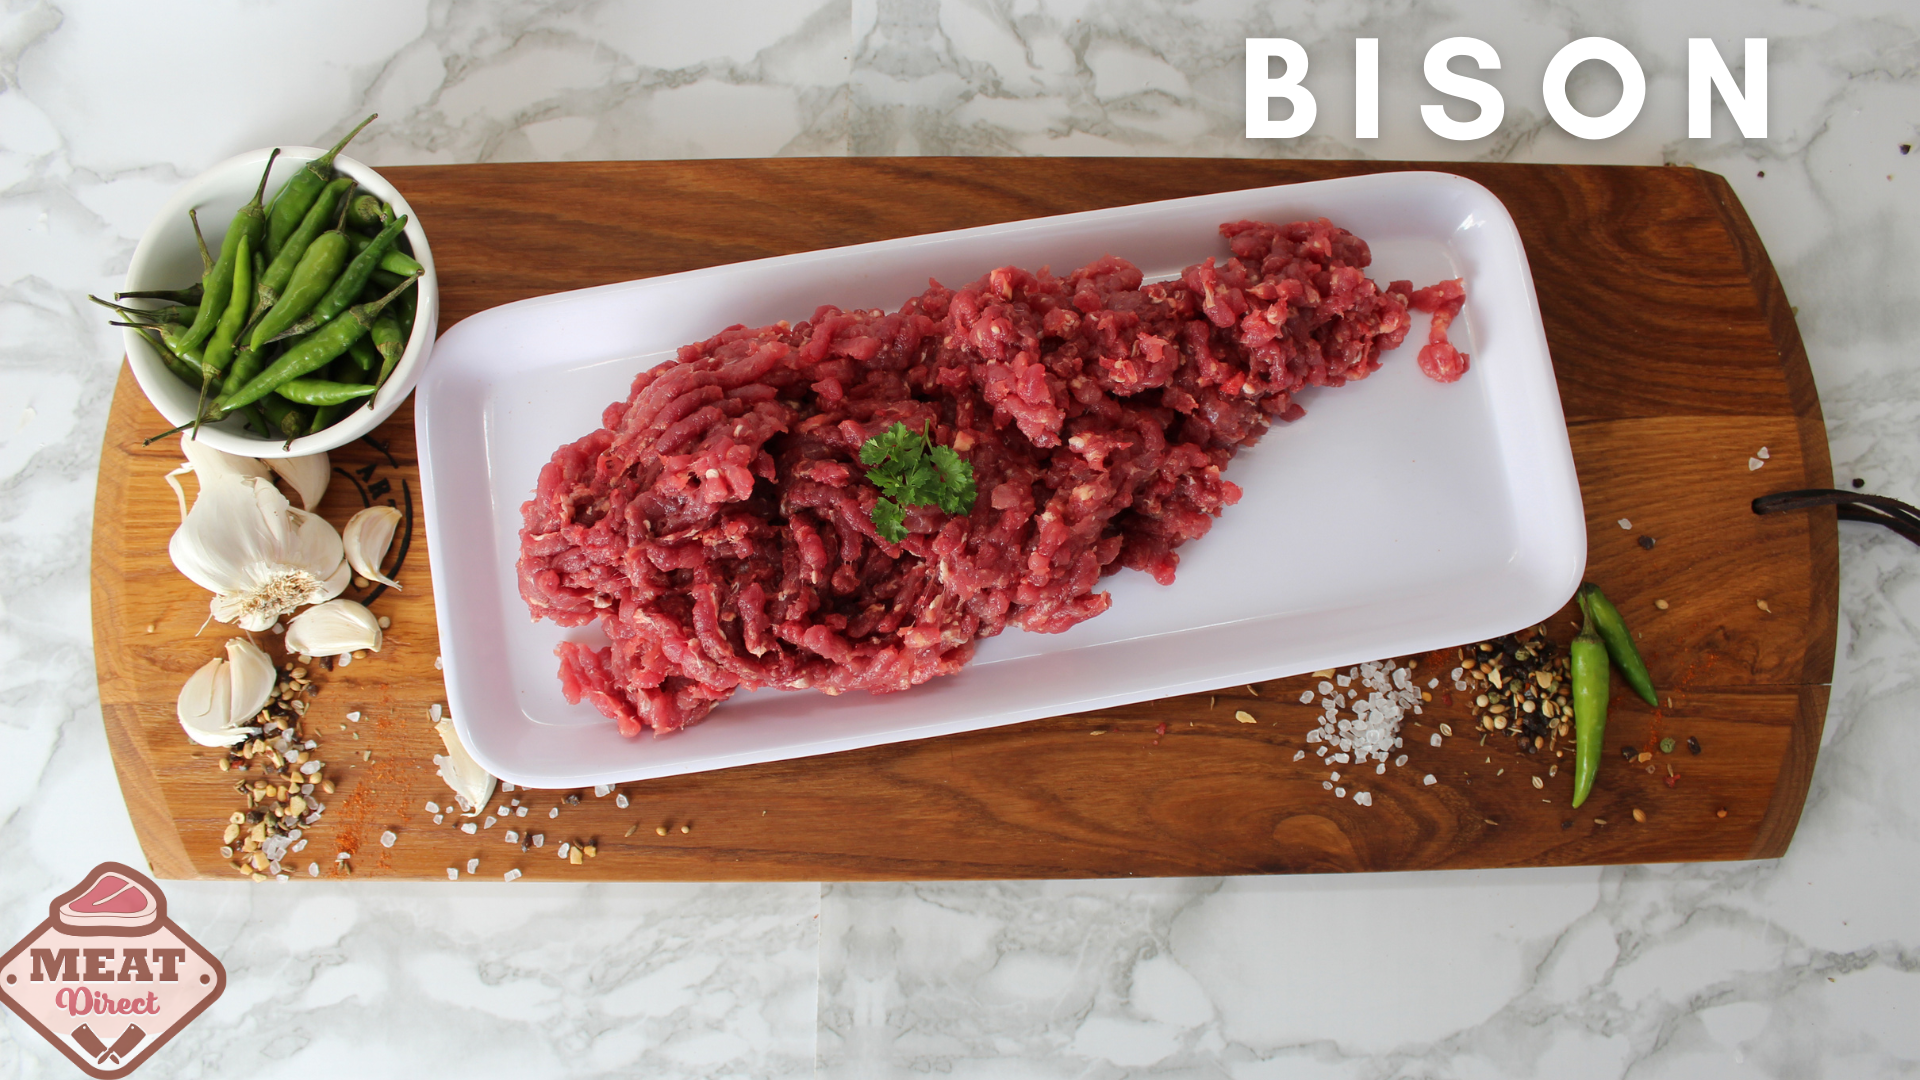 Ground 1 lb - Bison - Meatdirect.ca